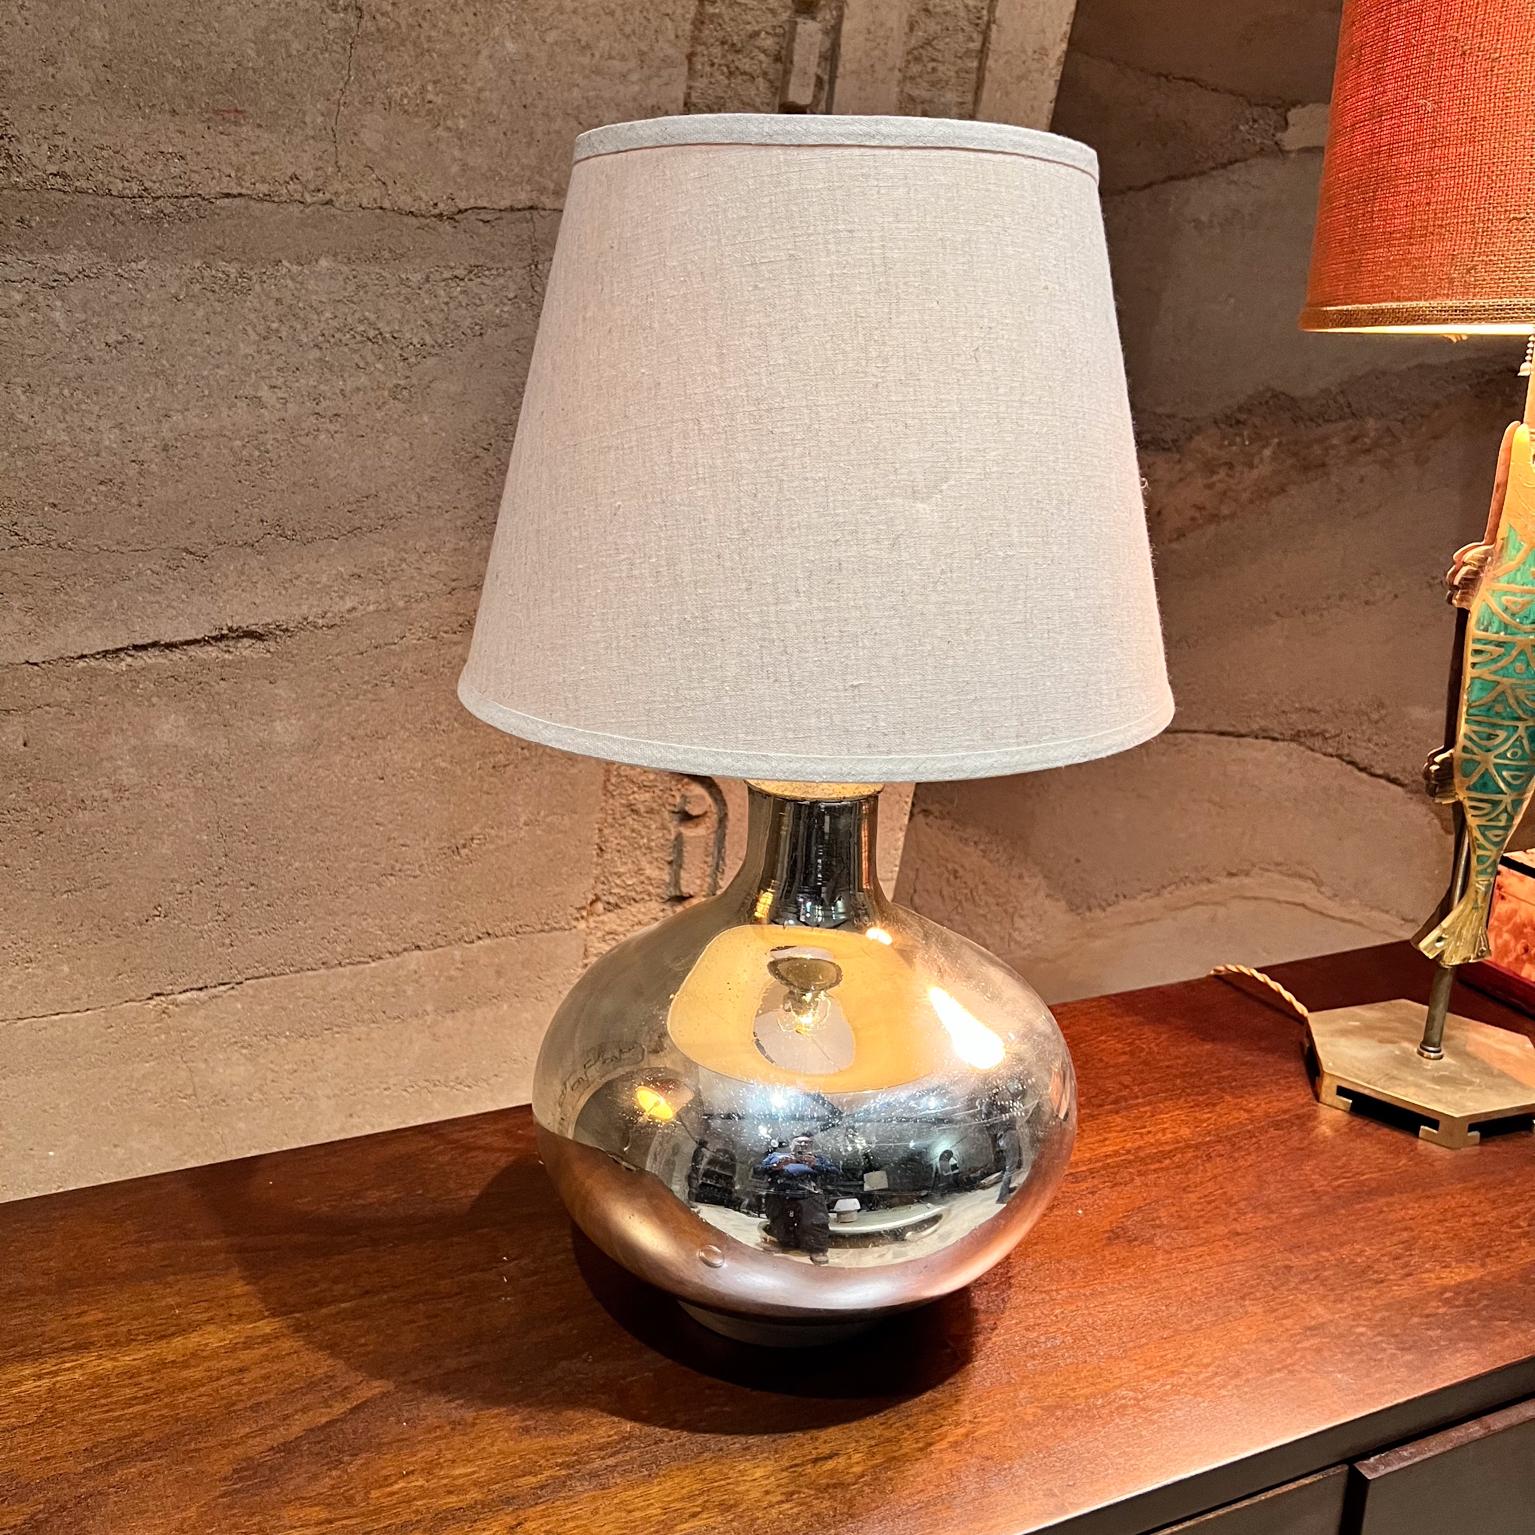 1950s Mercury Table Lamp Style of Luis Barragan Mexico
Wood base with silver leaf. 
18 h socket x 13 diameter
Rewired New socket, twisted gold cord and new plug with new switch. 
Tested and working.
 No label. 
No lamp is shade included.
Preowned